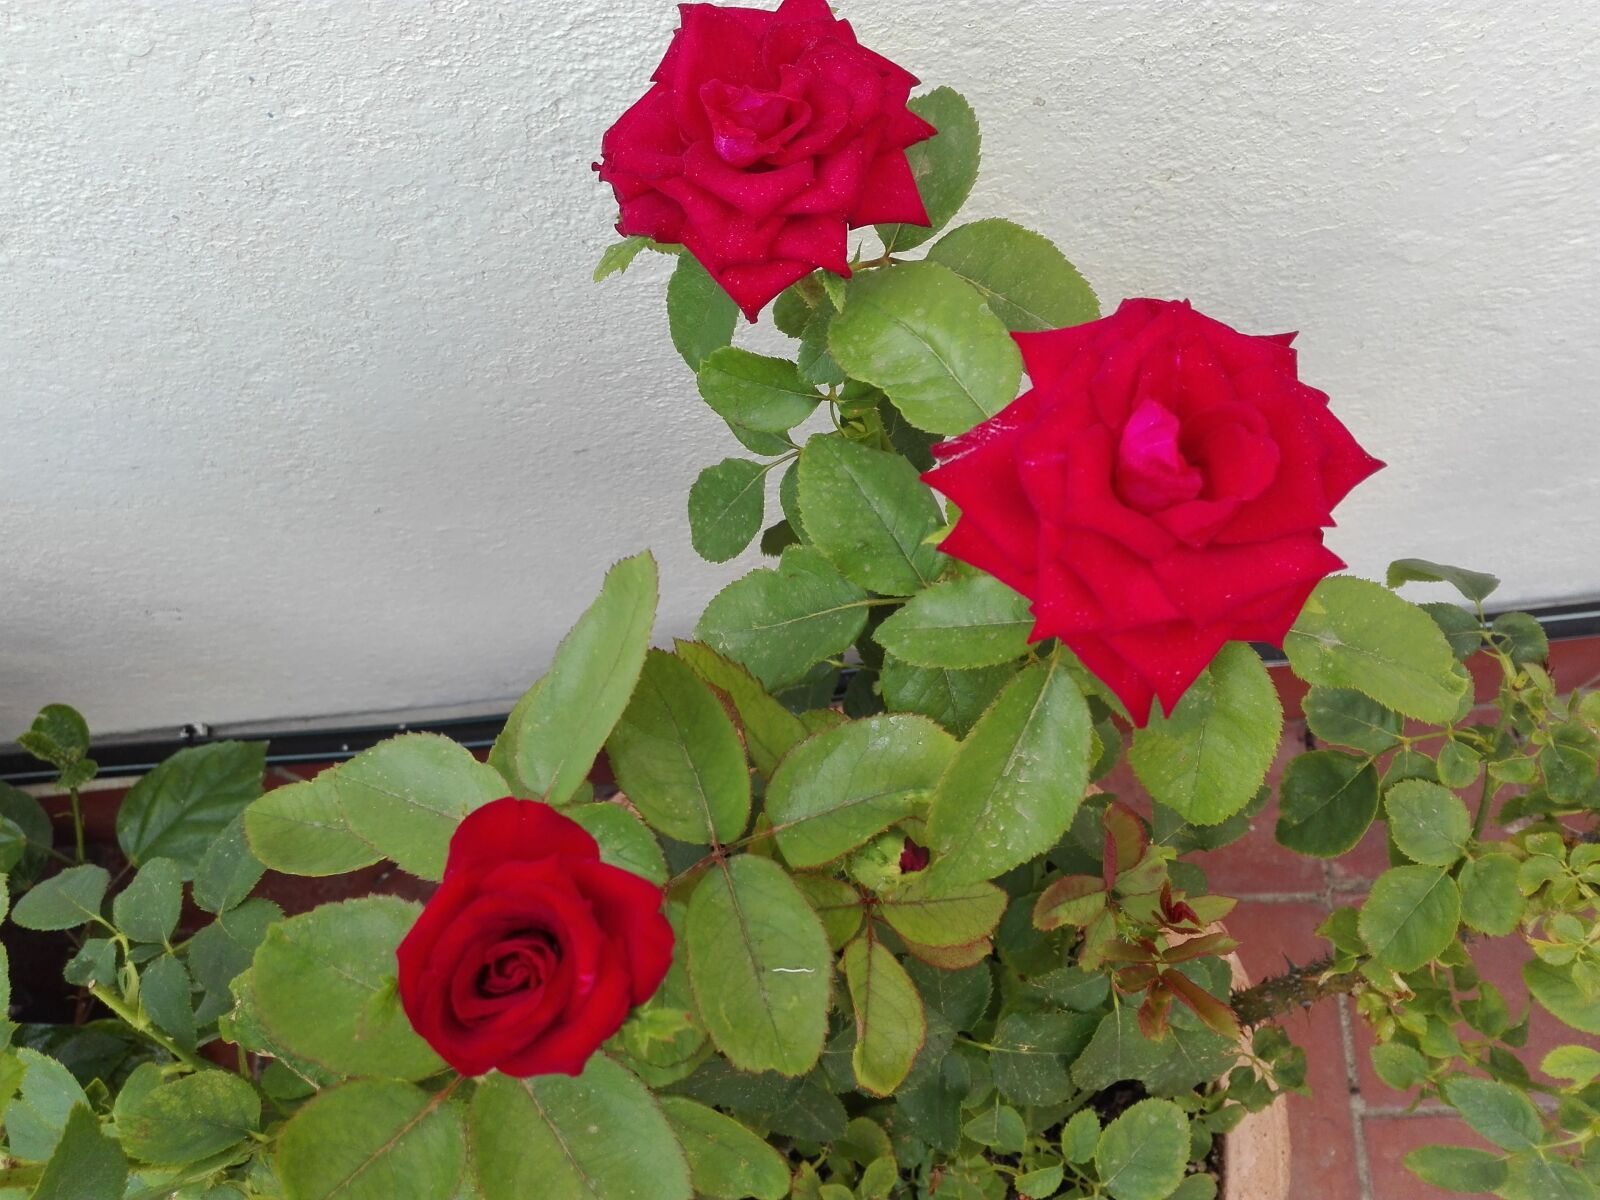 HUAWEI P8 Lite sample photo. Roses, plants, red photography